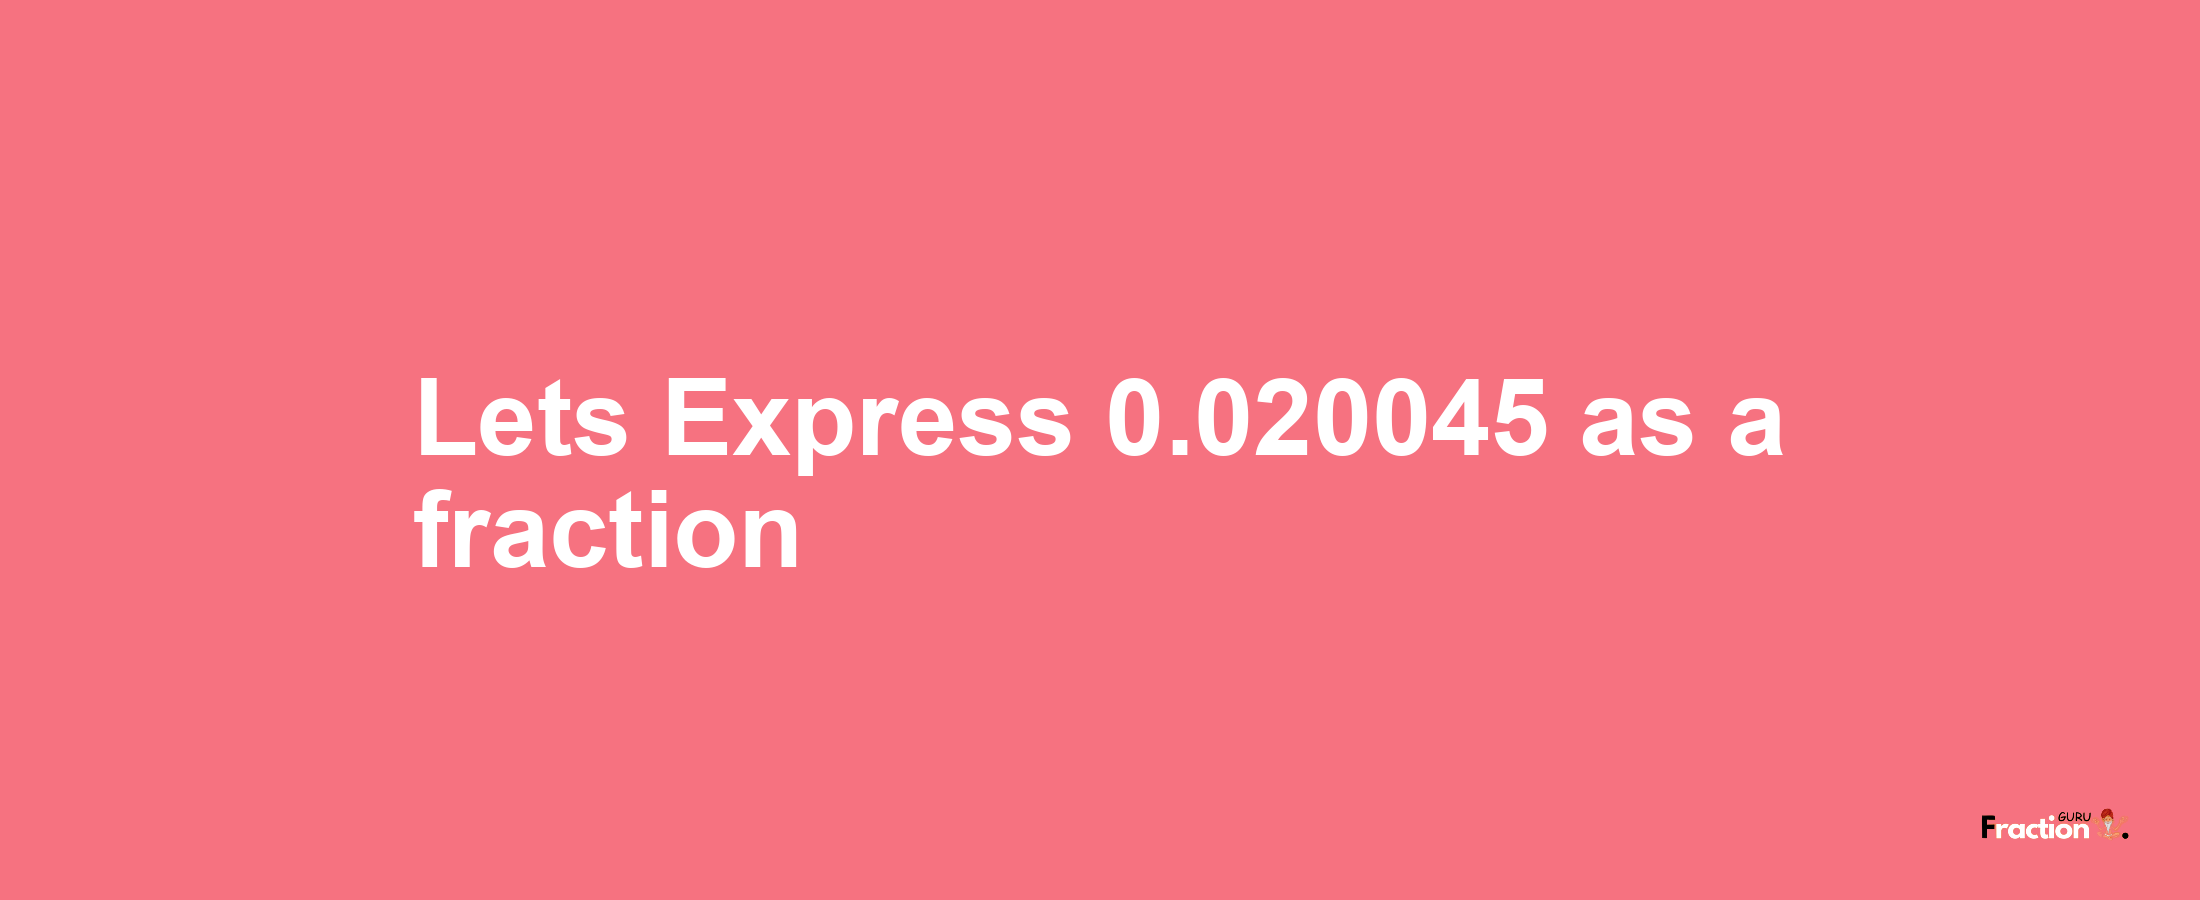 Lets Express 0.020045 as afraction